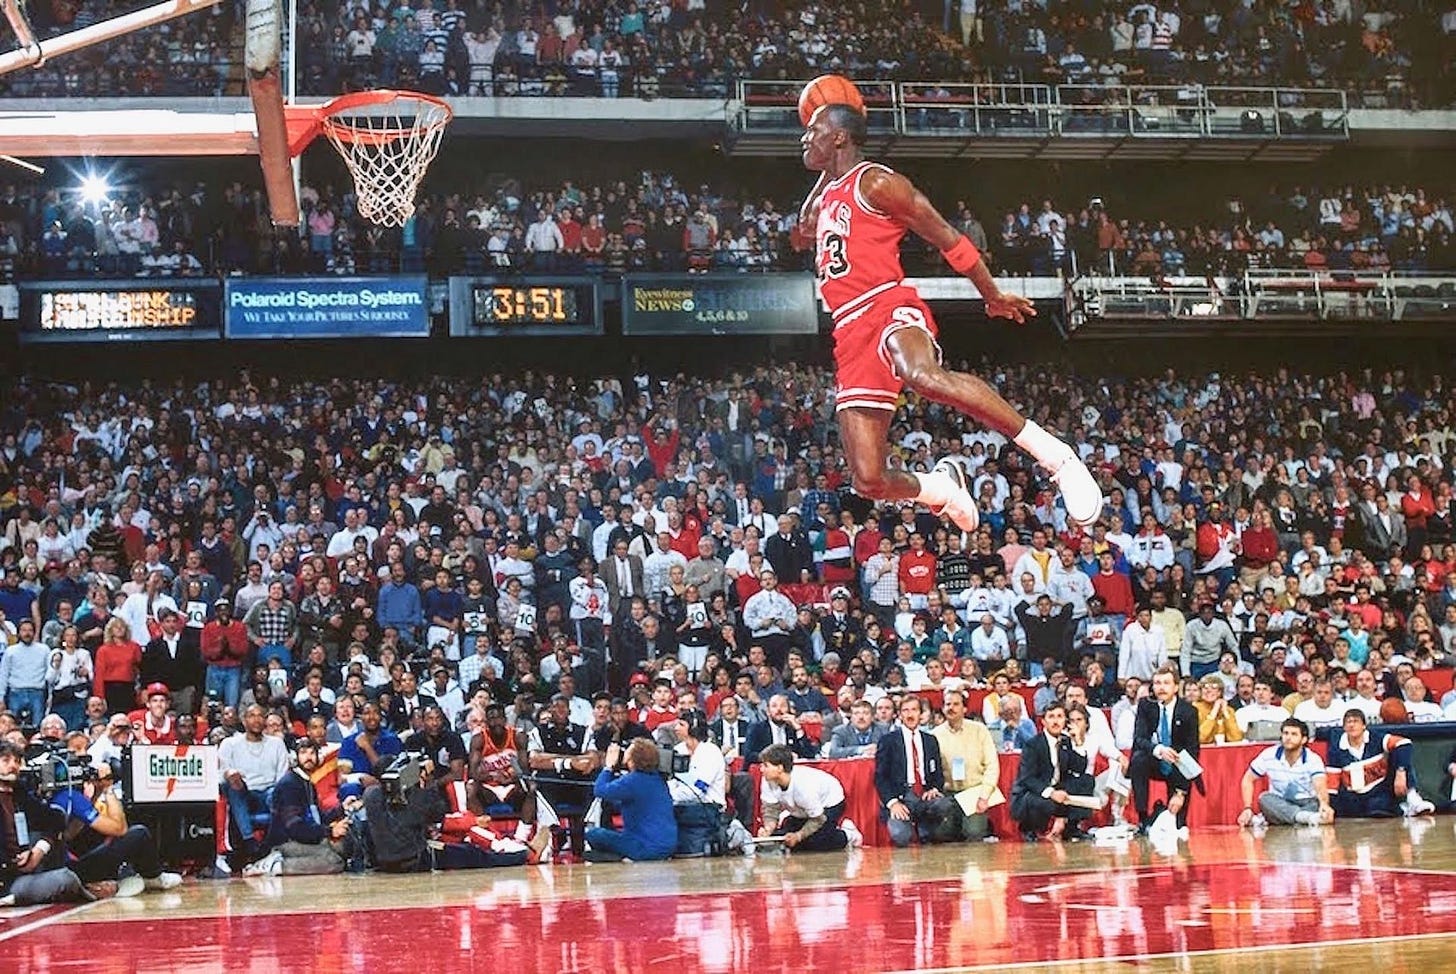 Watch: Throwback to when Michael Jordan dominated the dunk contest,  including his iconic slam from the free-throw line, 35 years ago today